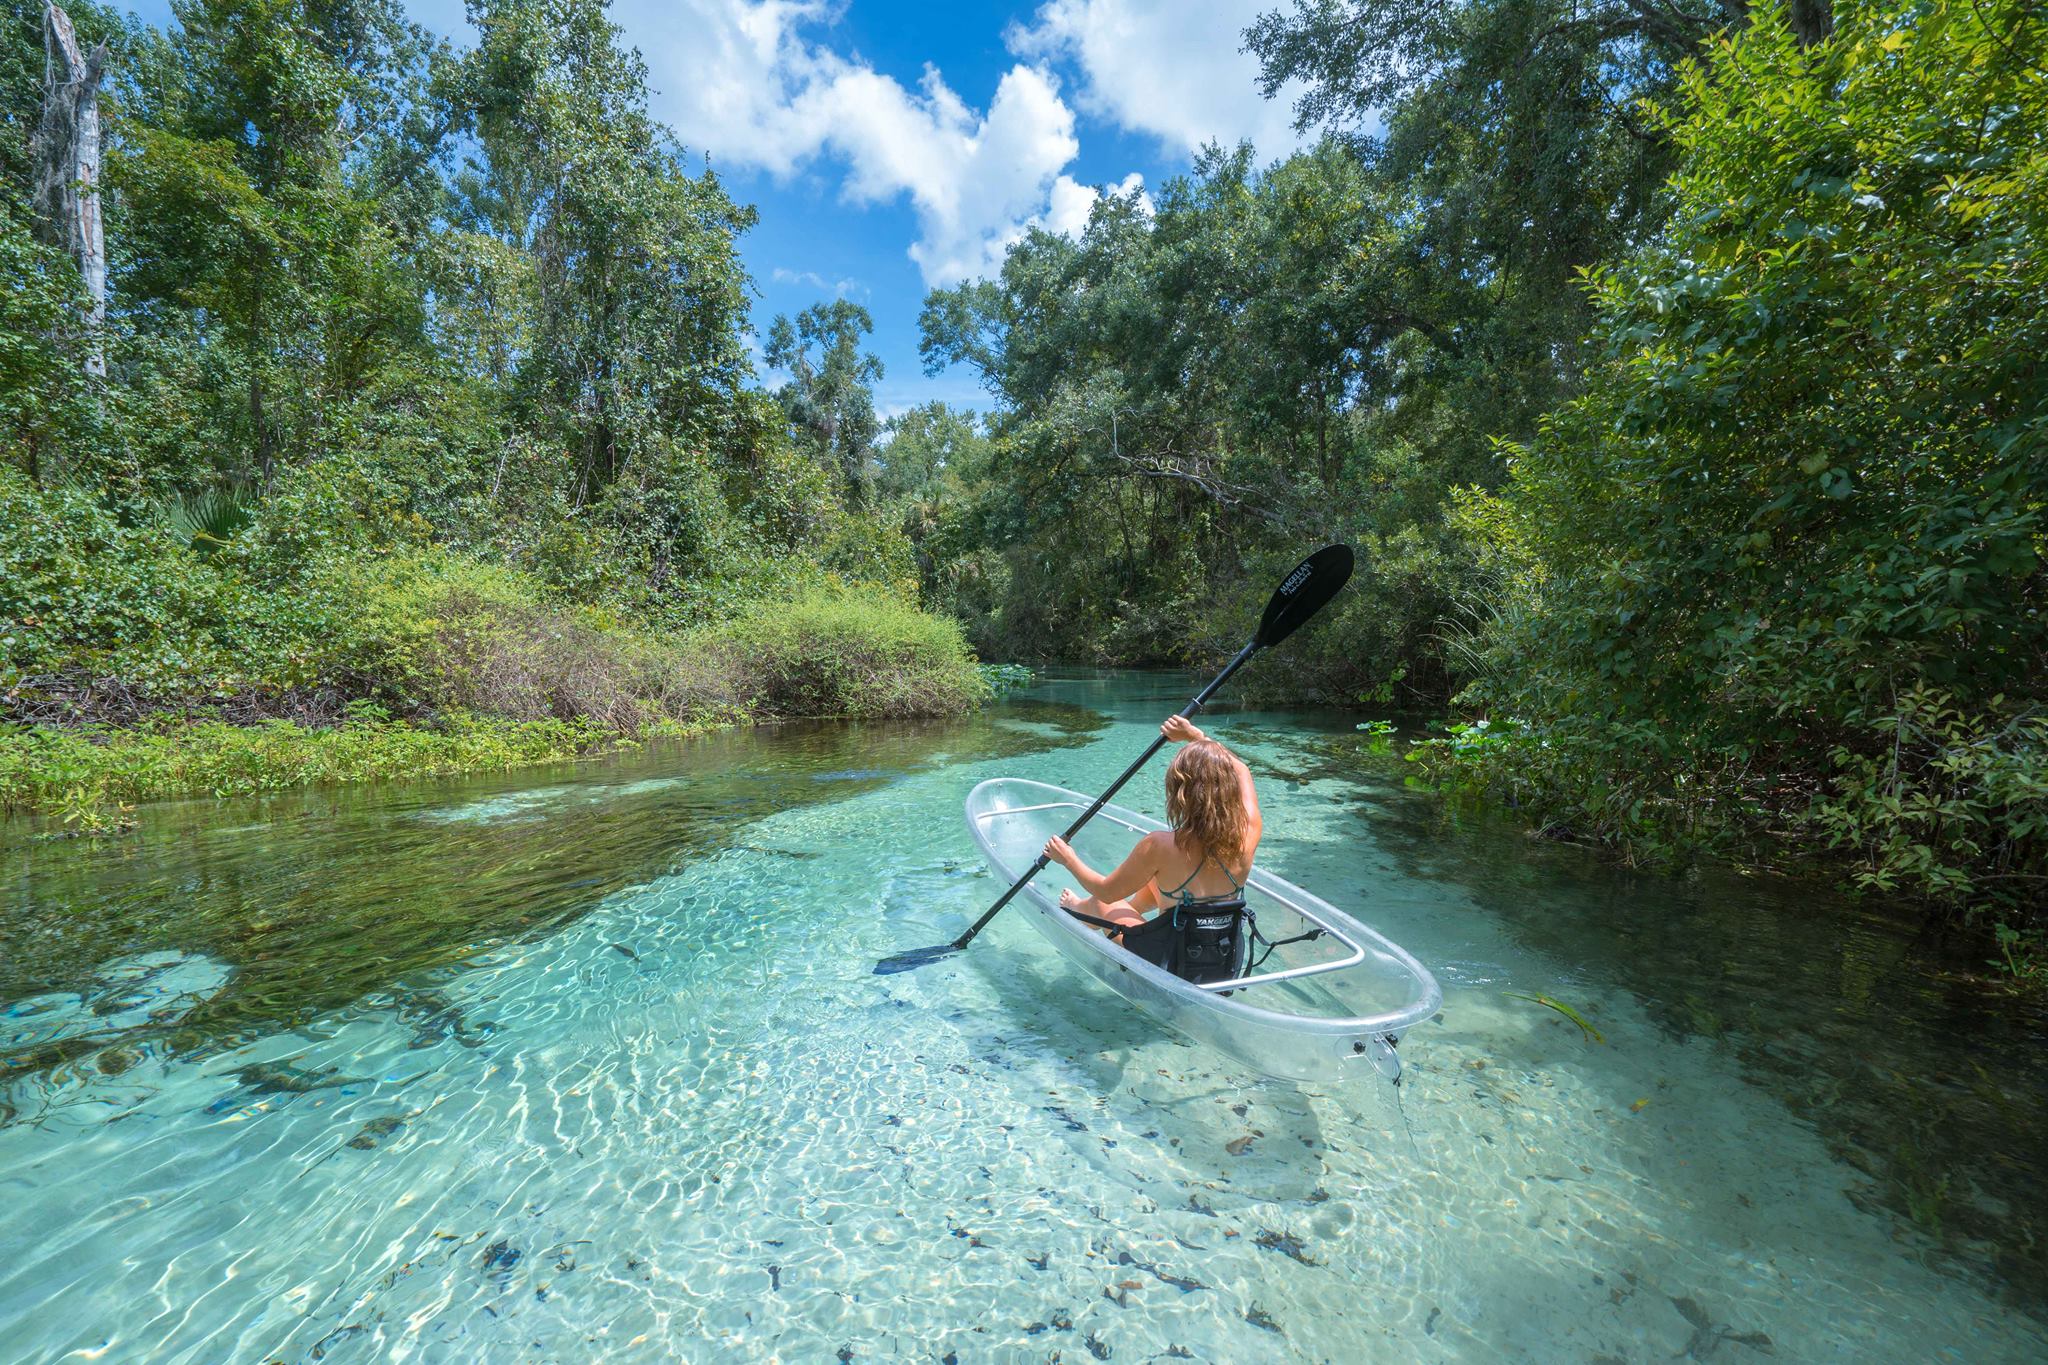 Woman in a clear kayak, kayaking through conservation land during the daytime in spring water that is a vivid turquoise color.